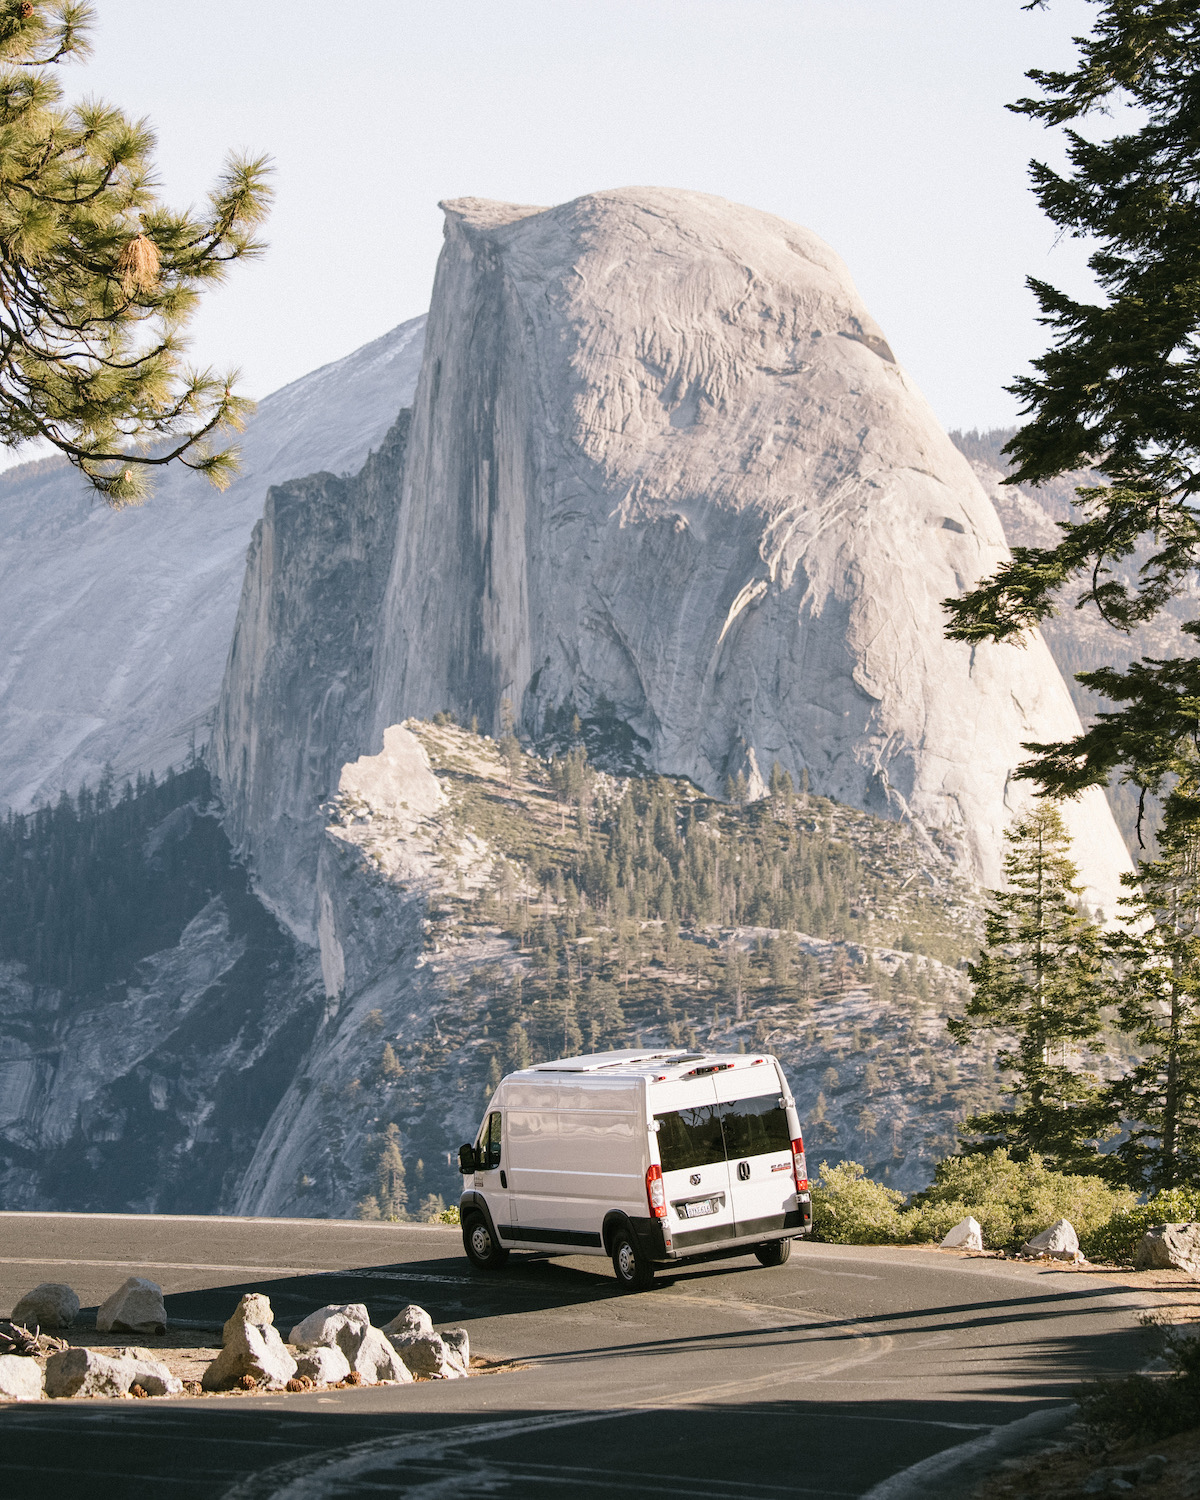 Campervan in front of mountain